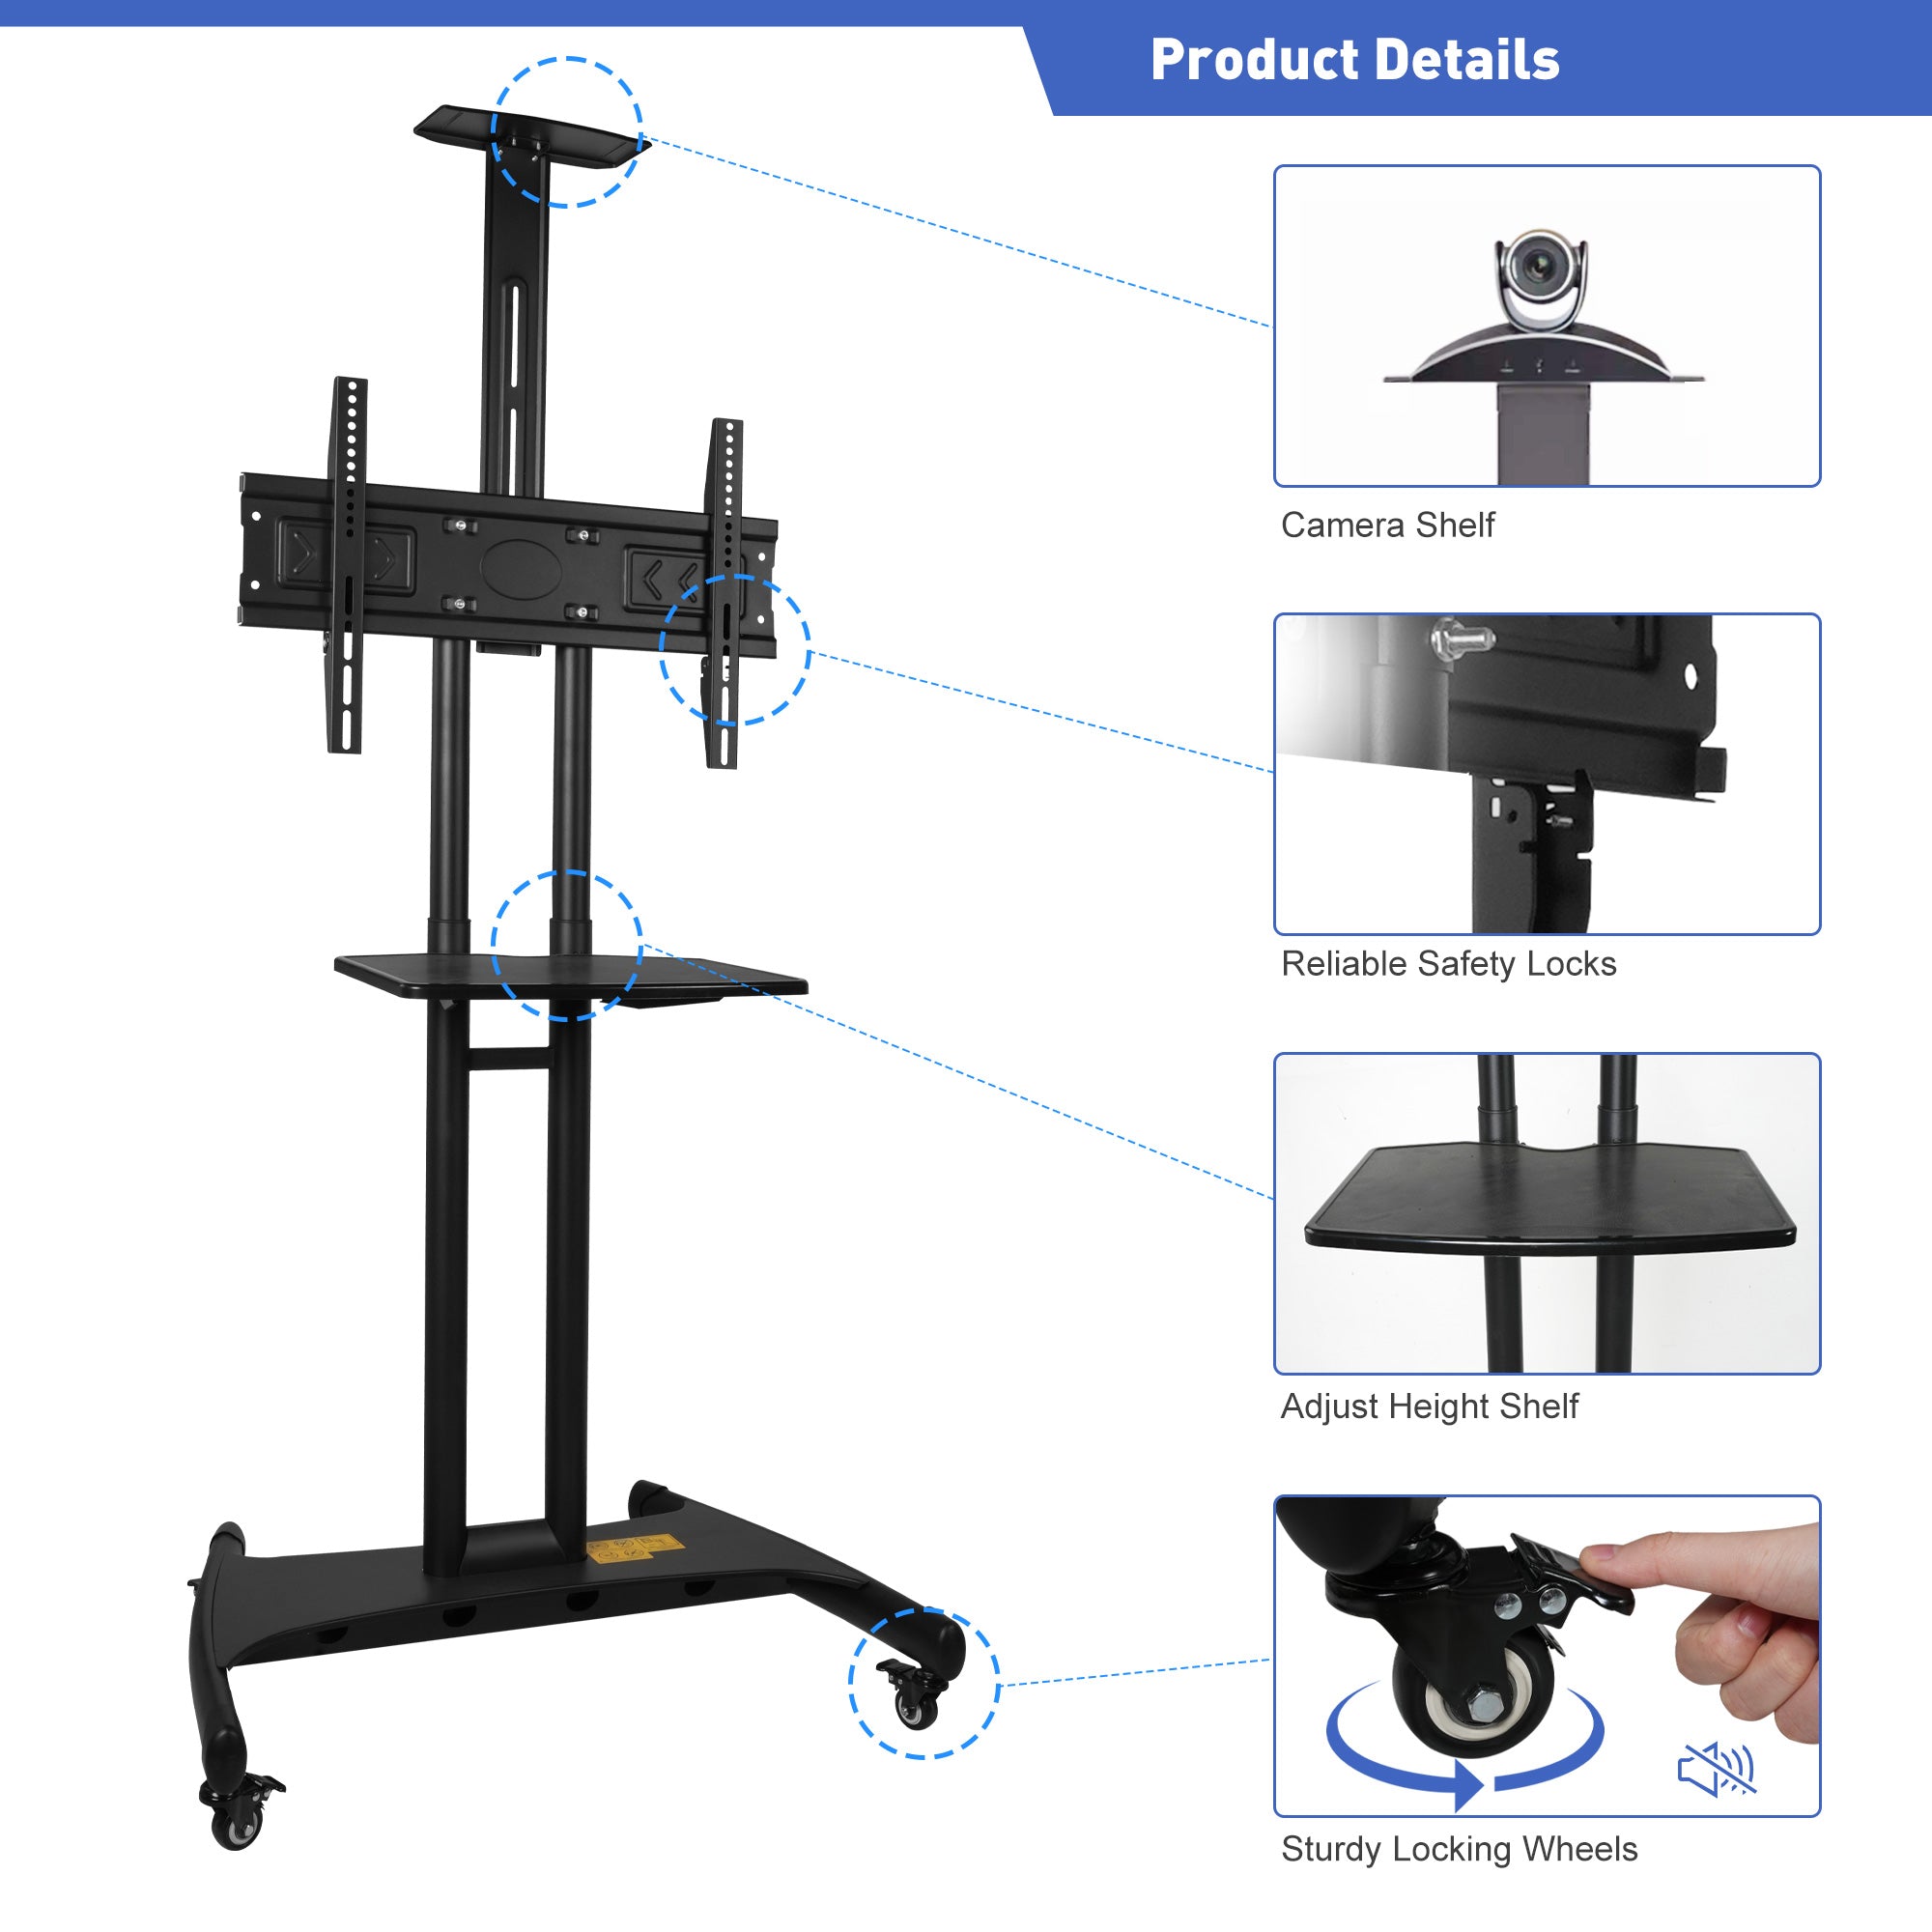 Portable Mobile TV Stand with Wheels for 32-70 Inch Flat Screen TVs - Tall TV Cart with Adjustable Height AV/Camera Shelf, Supports Up to 100lbs, Max VESA 600x400mm